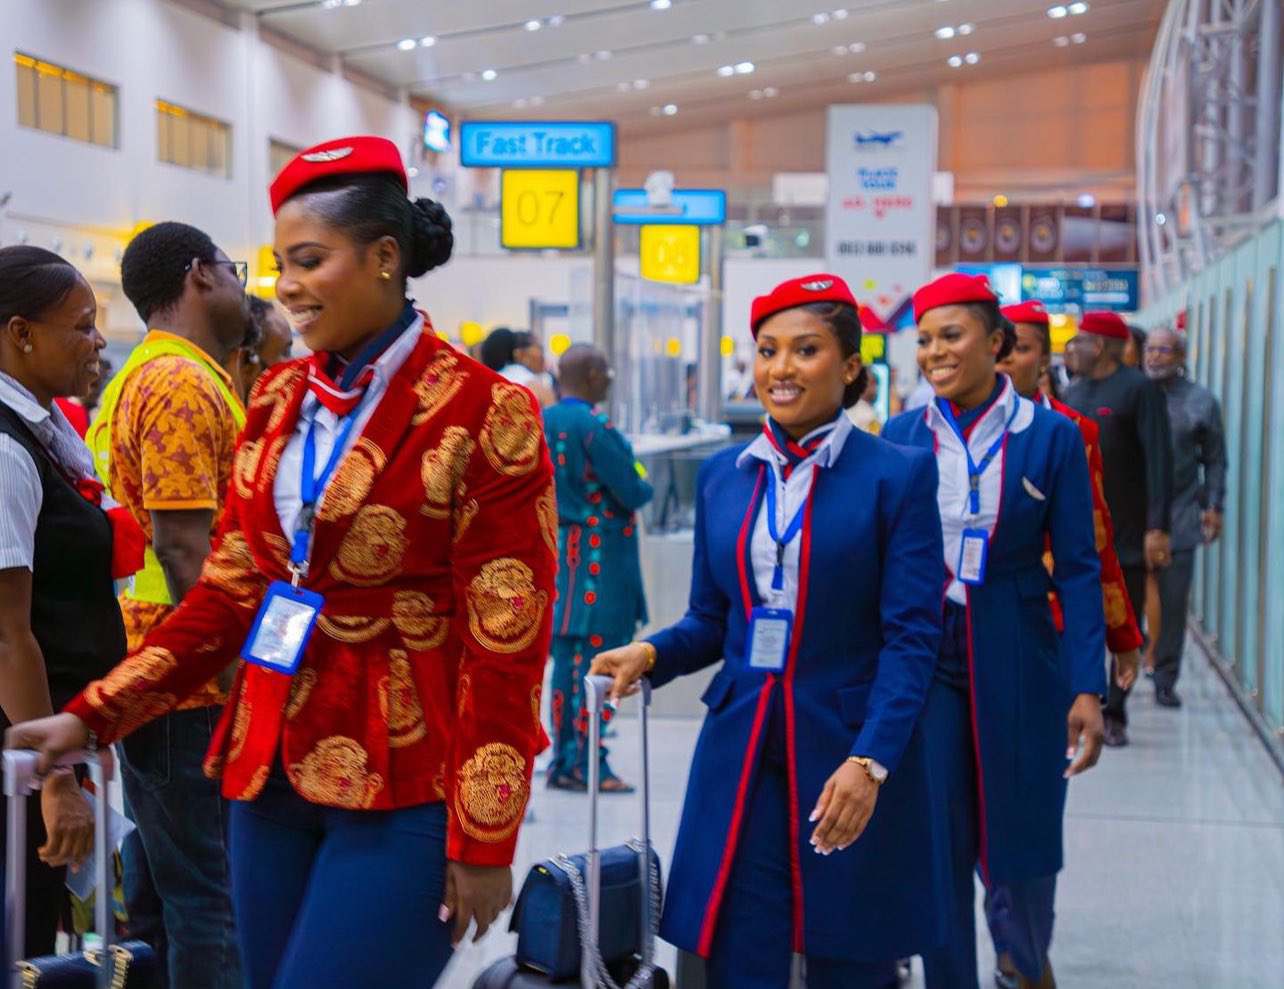 HOSTS HOSTESSES PHOTO Outrage as Airpeace employees arrived wearing